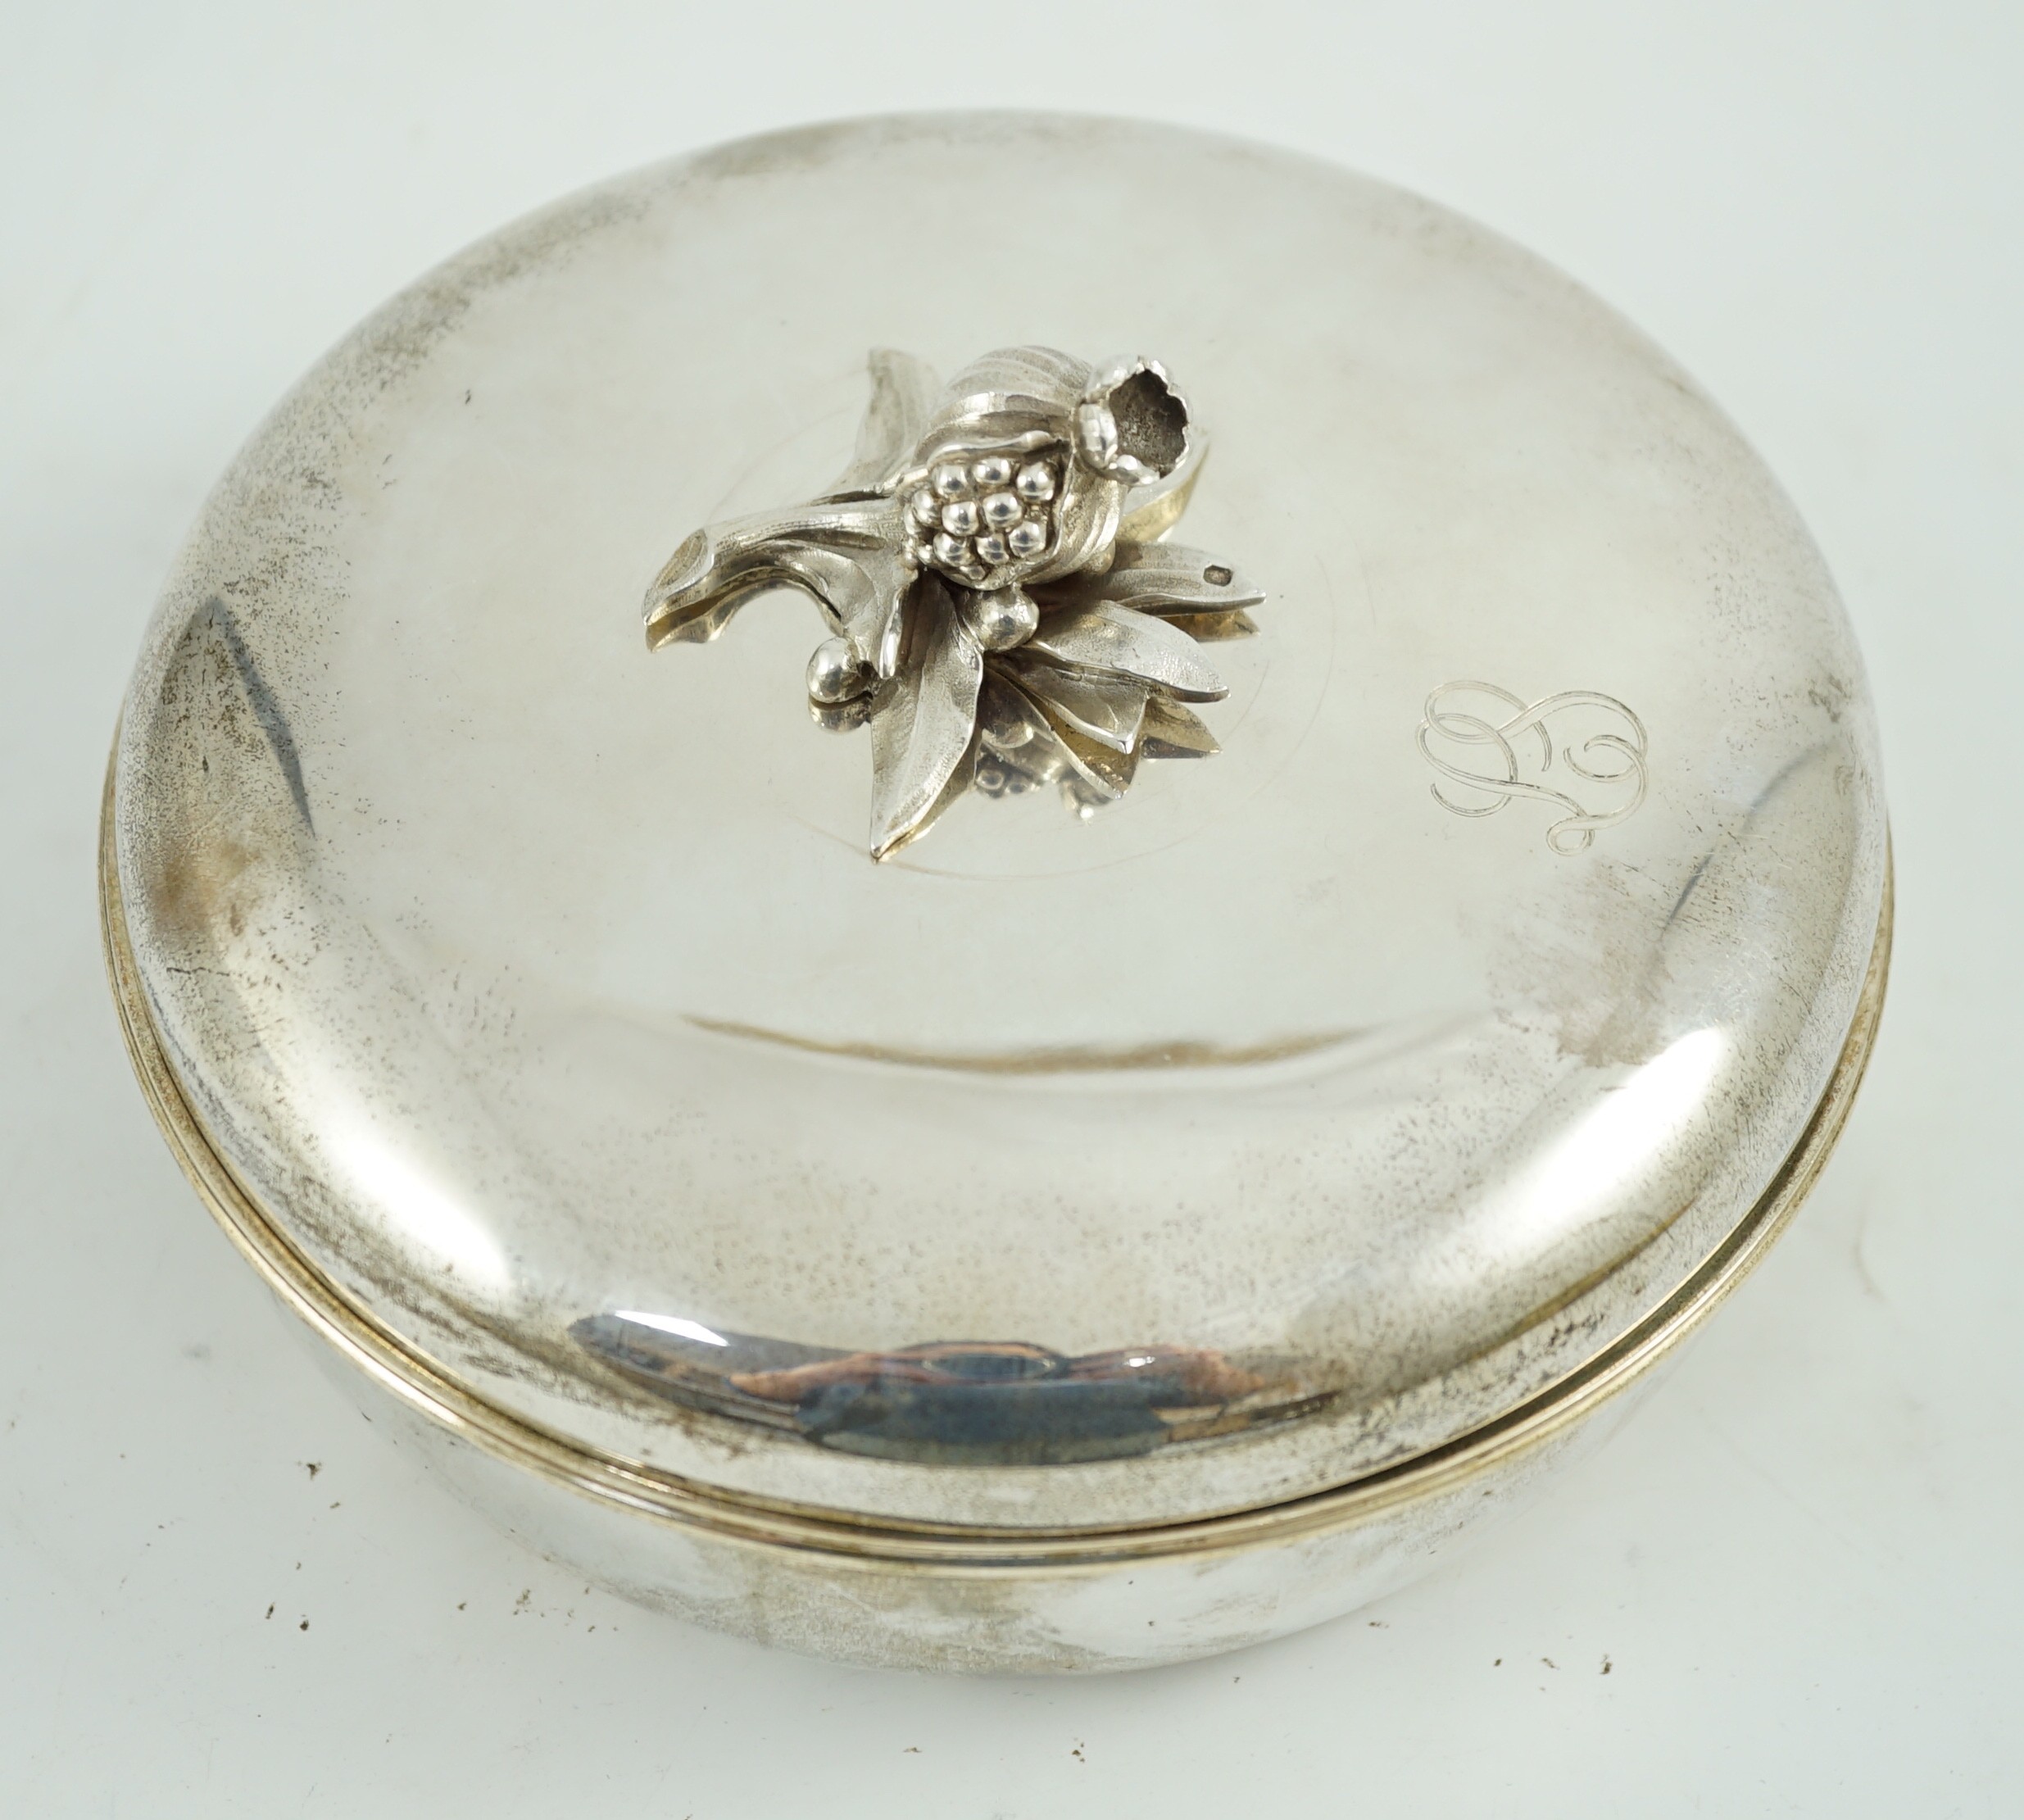 A 20th century French Emile Puiforcat for Cartier 950 standard silver bowl and cover, with - Image 3 of 5